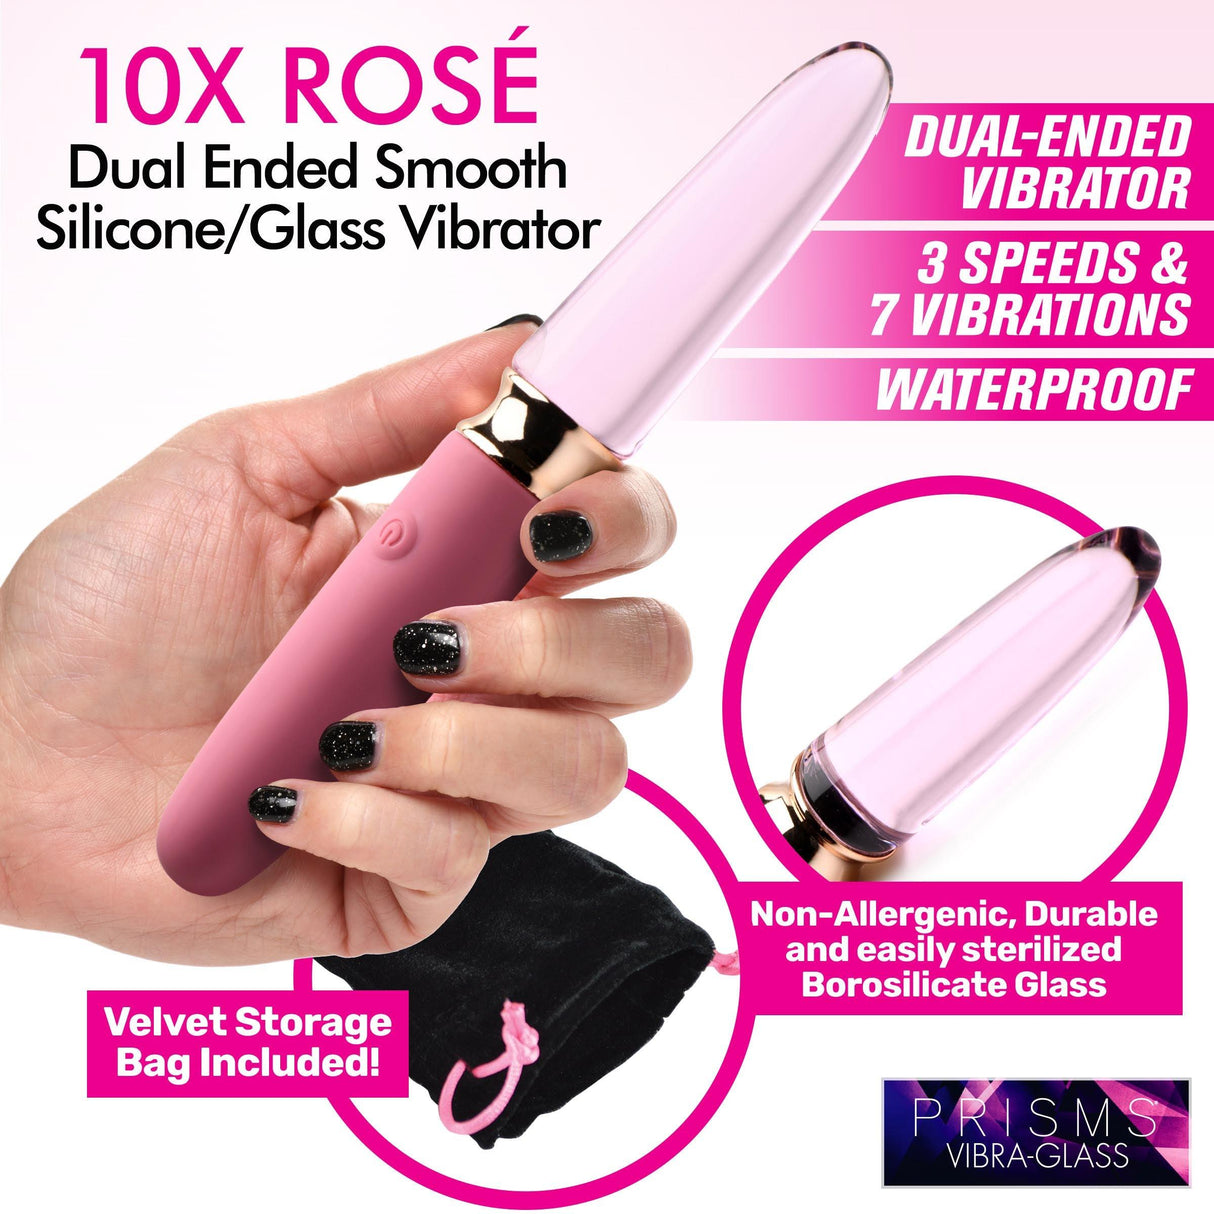 Prisms VibraGlass 10x Rose Dual Ended Smooth Silicone & Glass Vibrator